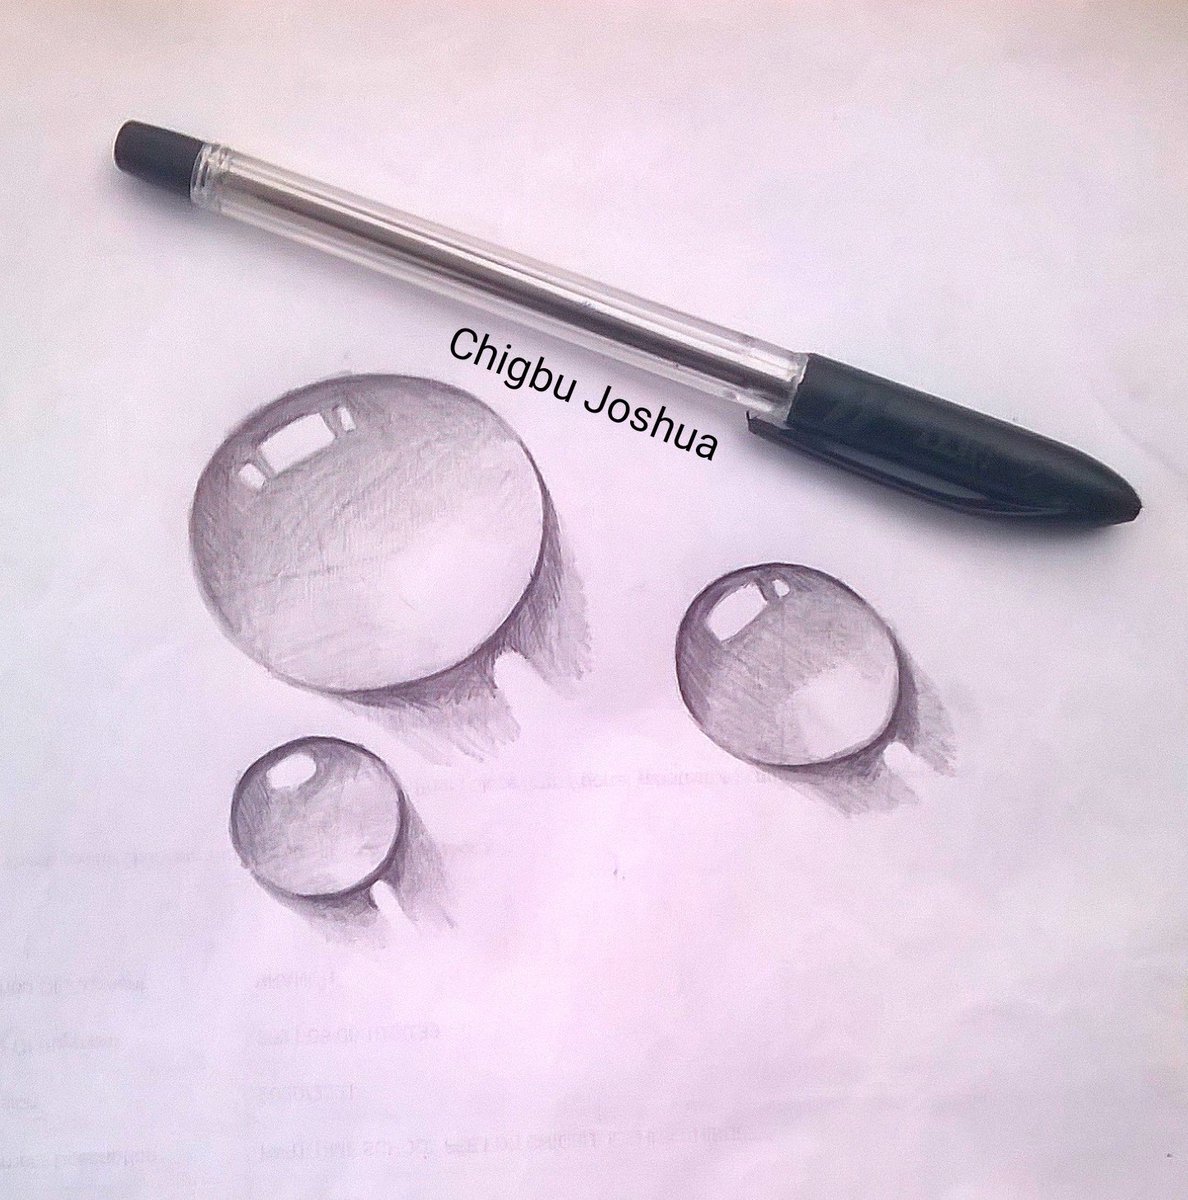 I drew this drops of water
.
.
Banky W Gistlover IDME #AssVrsBreast Adesua NIN and BVN Lionel Andres Messi The GOAT WhatsApp Chike Universities Burna Achraf Hakimi Unilorin